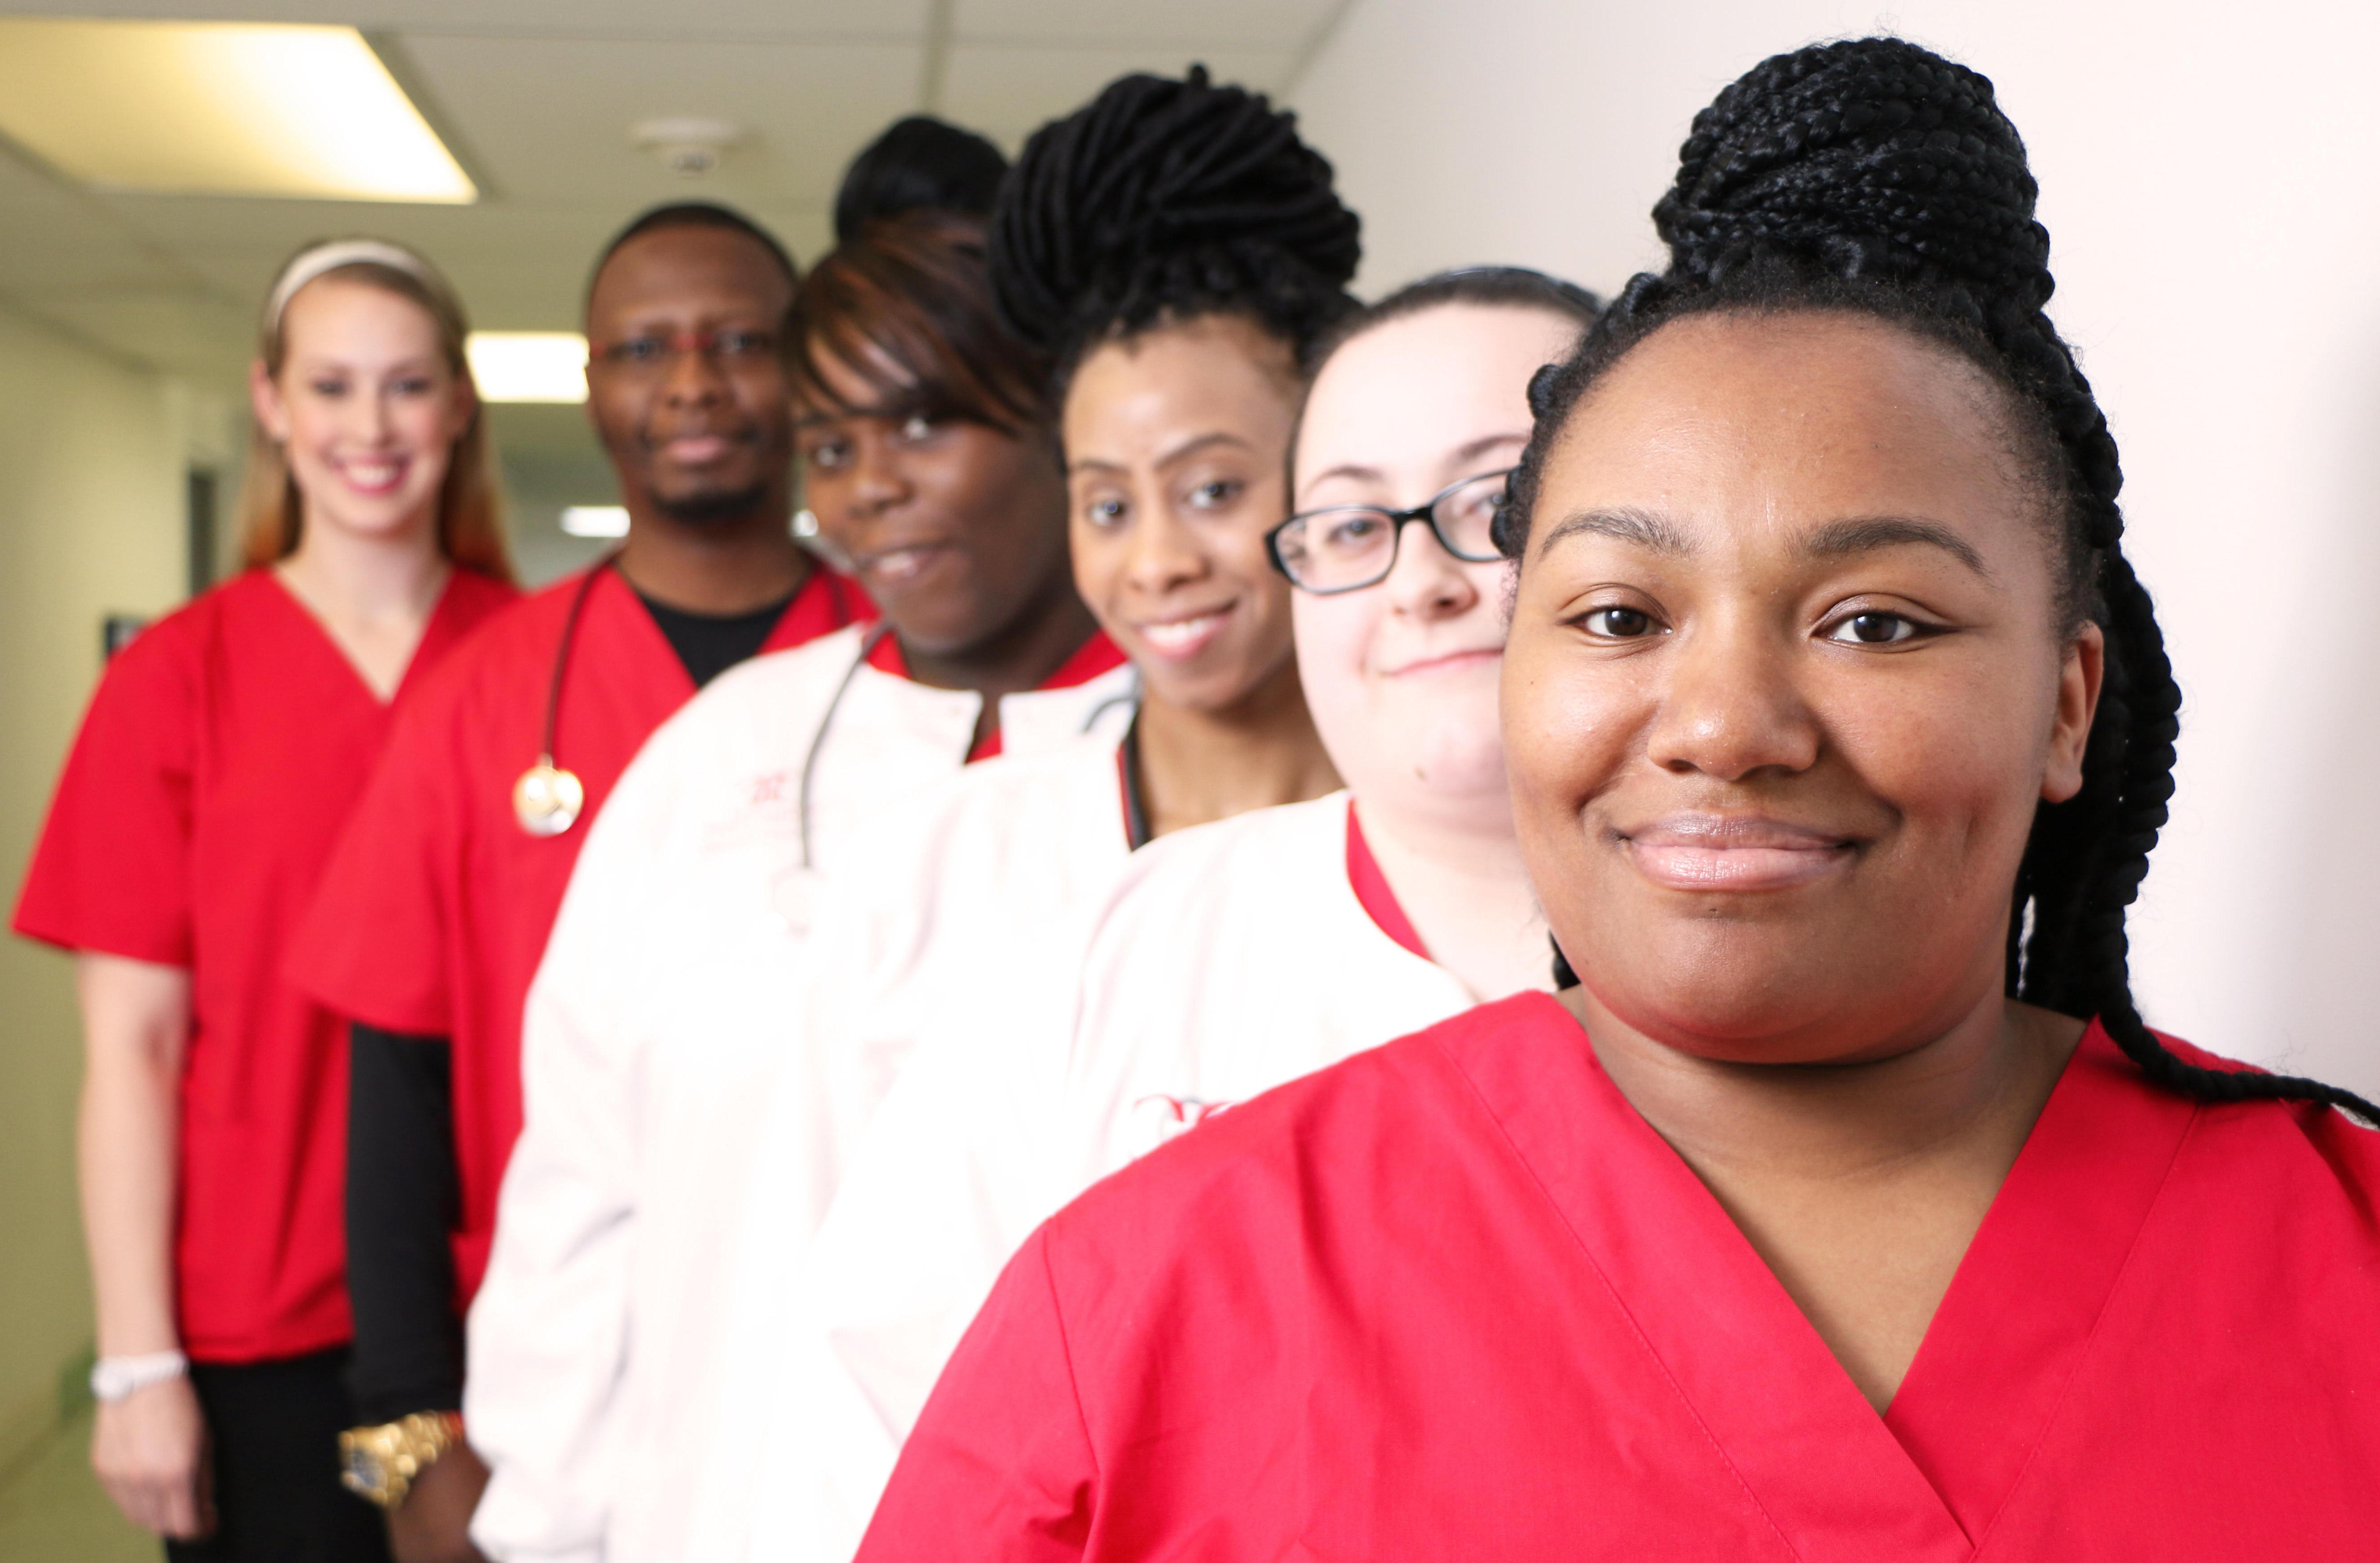 Nursing Program. Students in nursing program. Diverse, affordable. CNA. PN. RN. Registered Nurse, Practical Nurse, Certified Nurse Aide. Pass rate. Donnelly College in Kansas City, Kansas. Certificate and Degree. Associate degree and Bachelor's degrees pathways. 